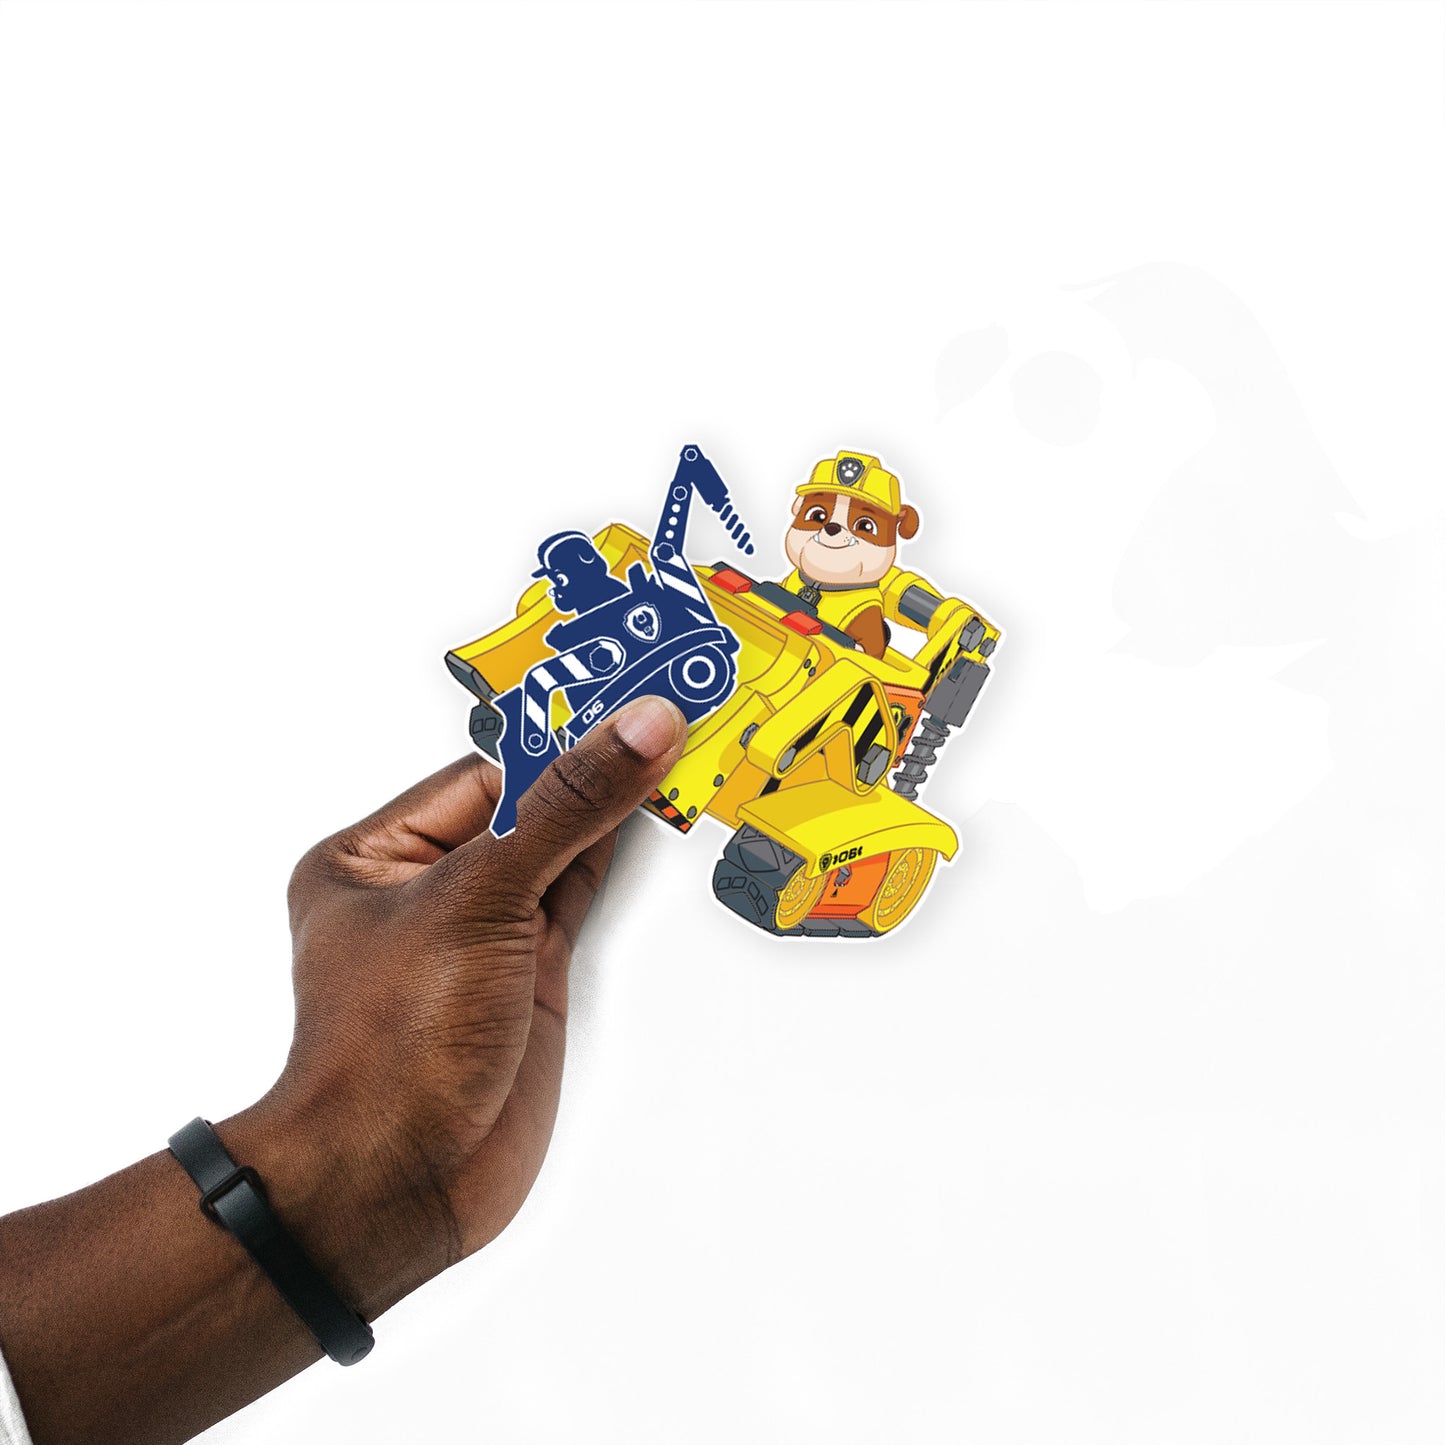 Paw Patrol: Rubble Minis        - Officially Licensed Nickelodeon Removable     Adhesive Decal